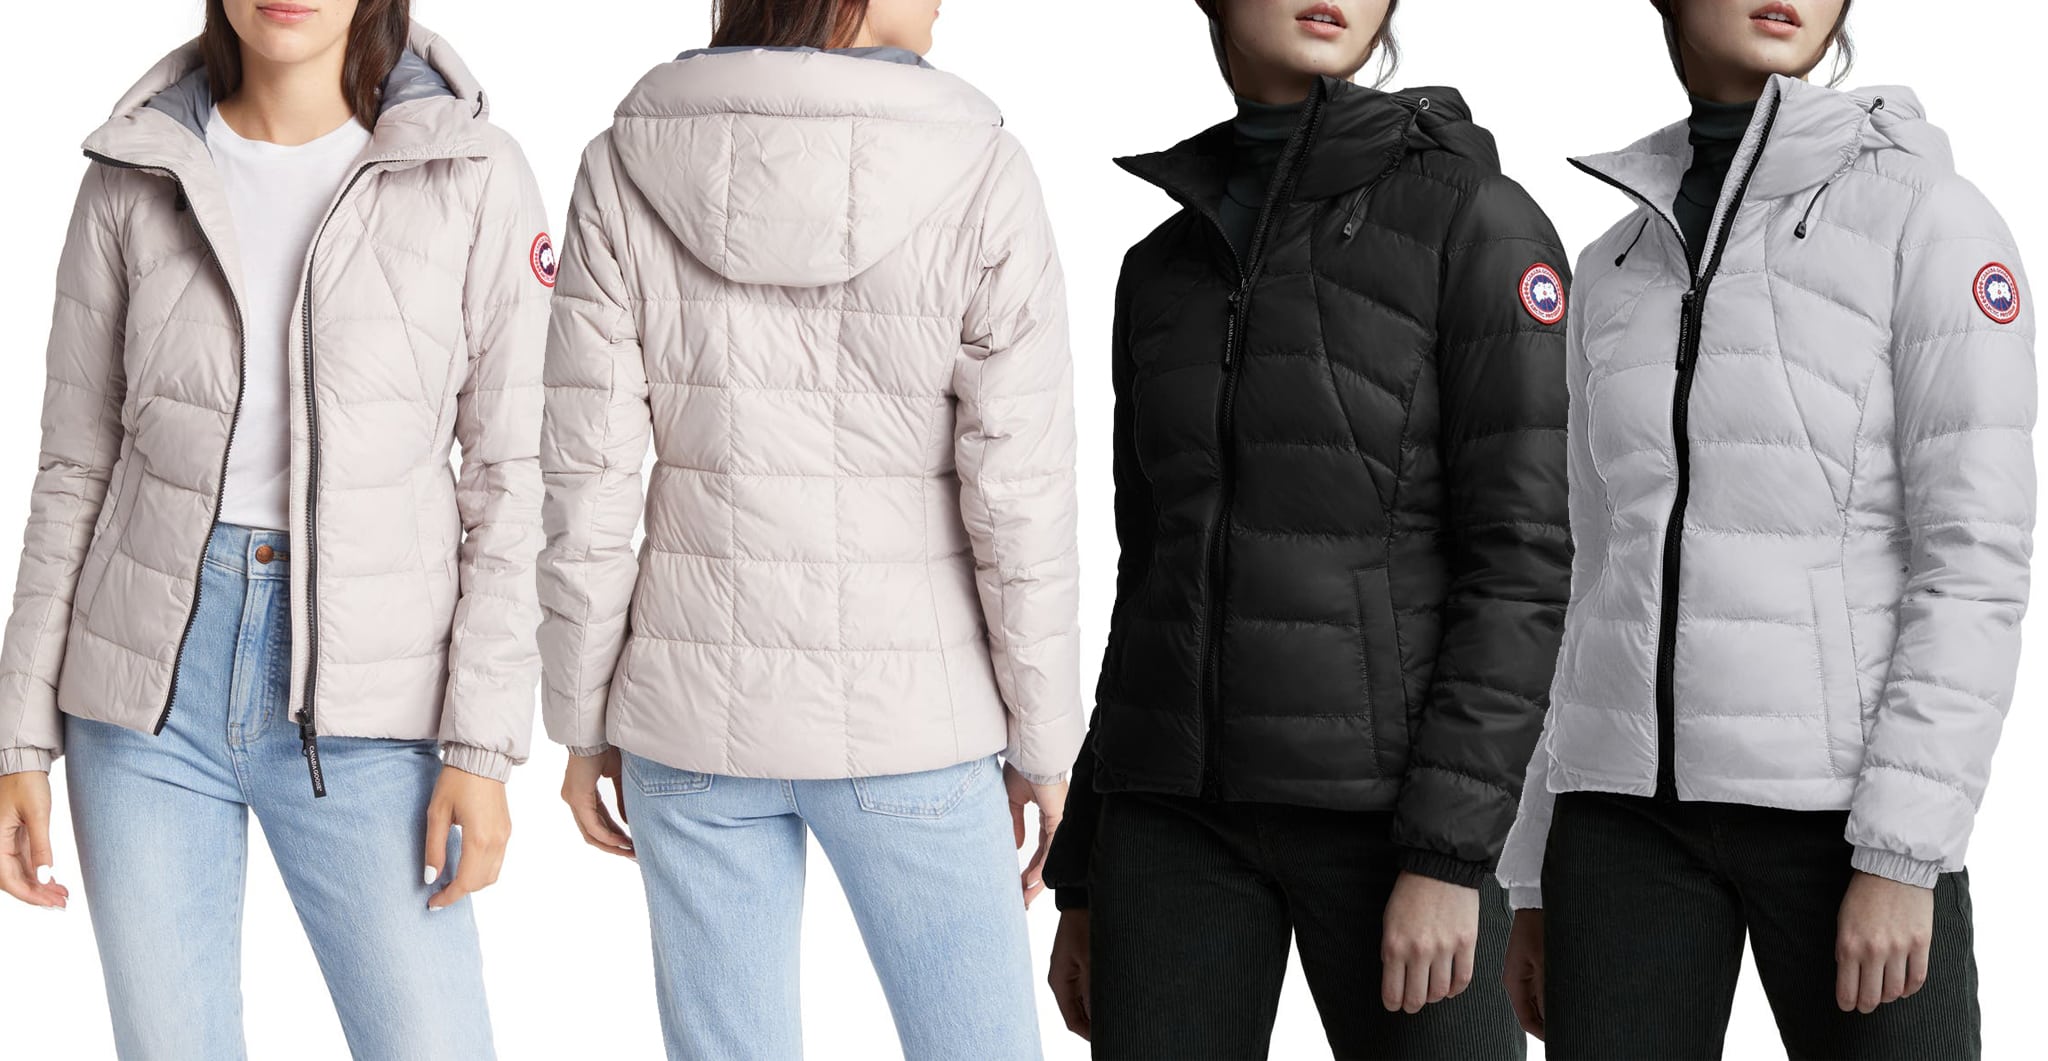 Travel essential: Canada Goose's Abbott jacket, lightweight and packable, lined with 750-fill-power Hutterite white goose down insulation